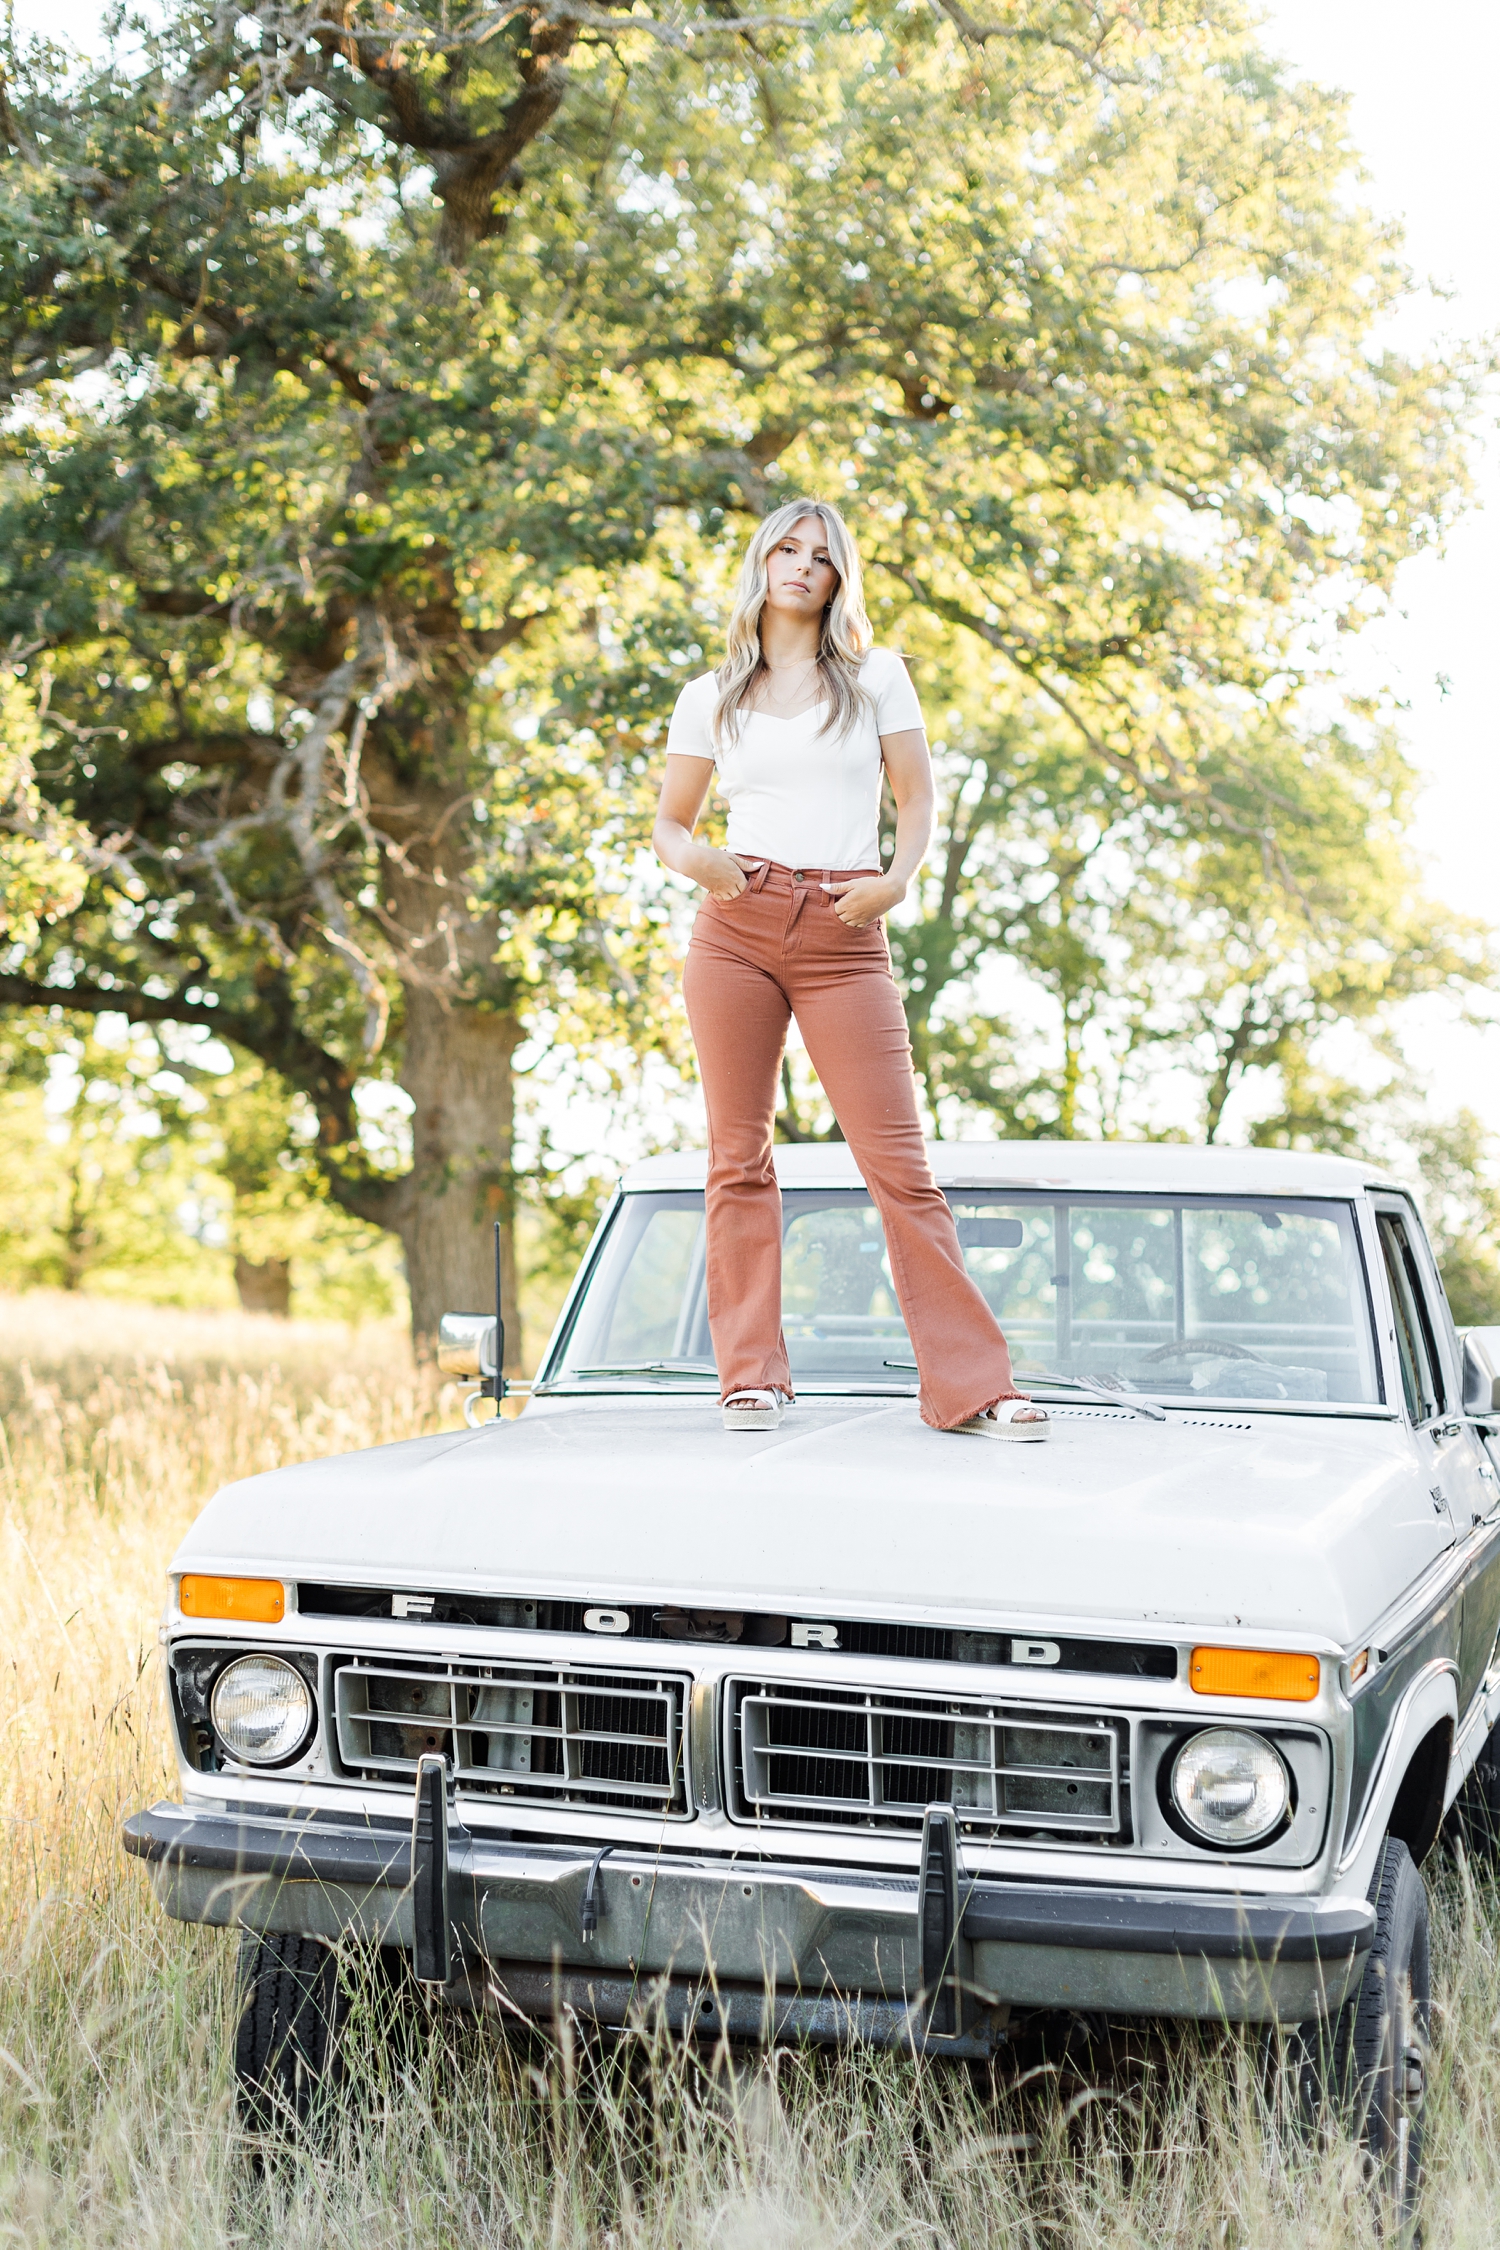 Eden, wearing burnt orange bell bottoms, stands on the hood of a 1970's Ford High Boy in the middle of a grassy field | CB Studio